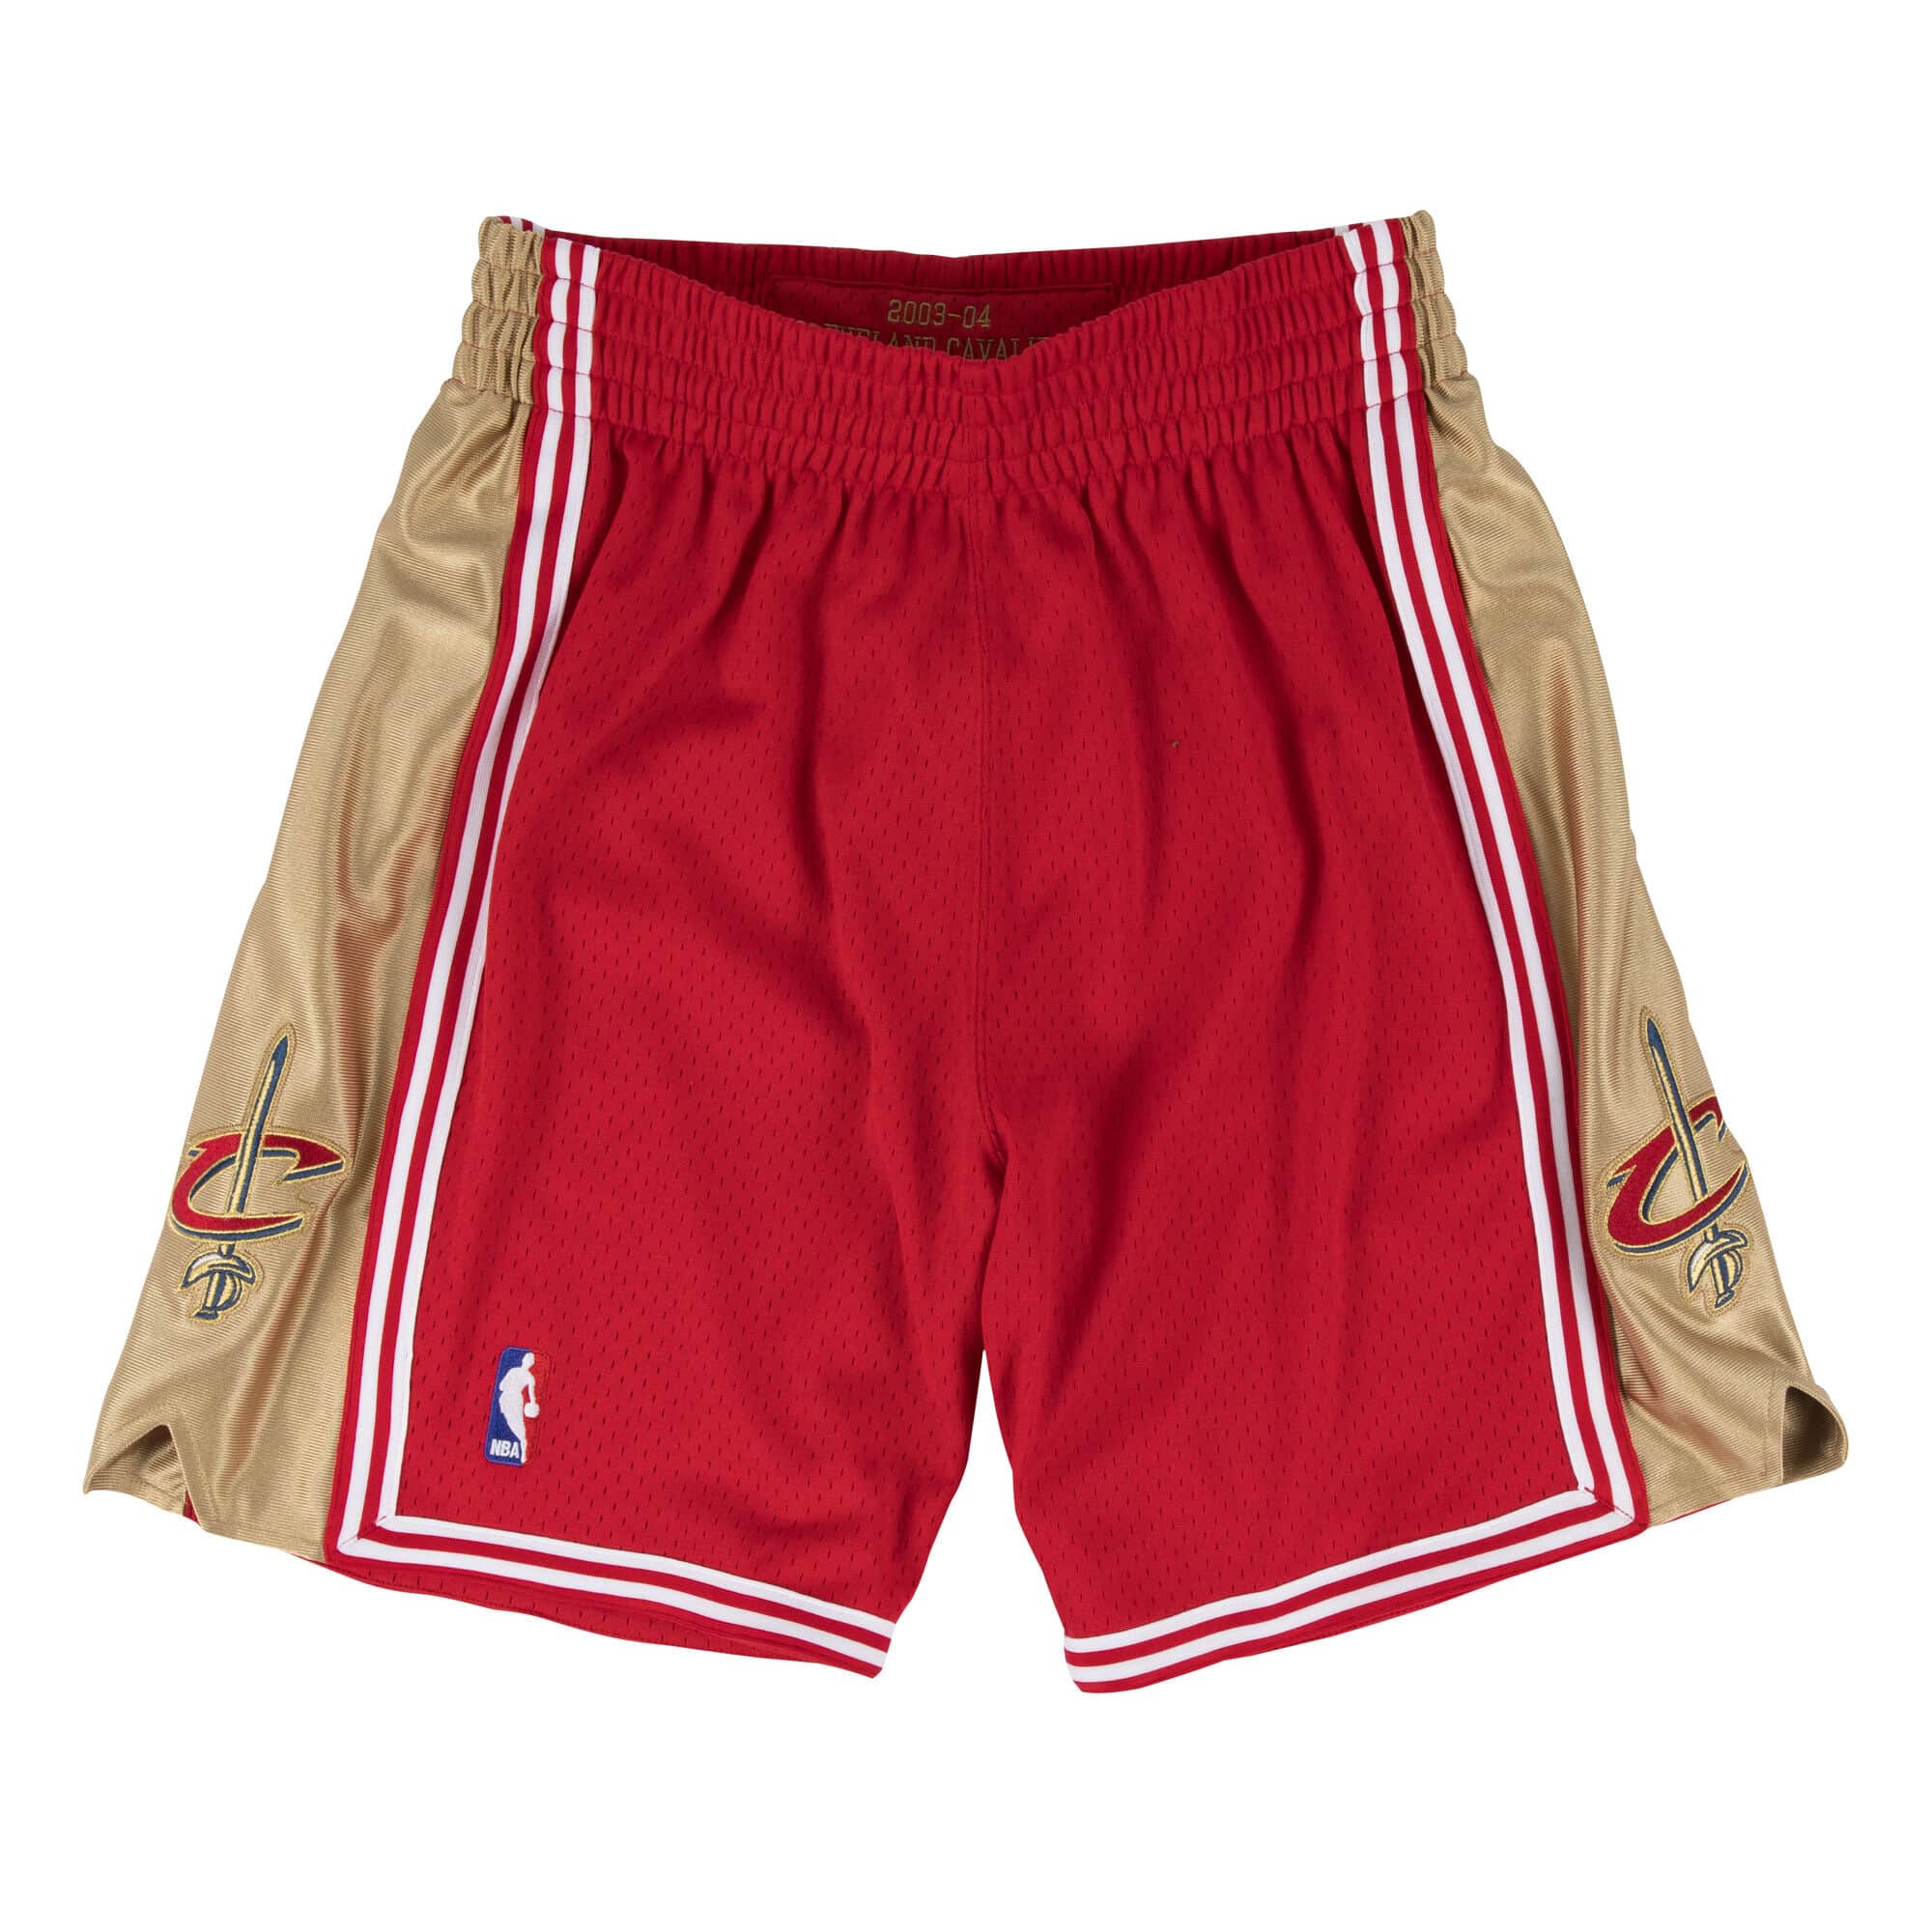 Mitchell & Ness NBA Authentic Shorts Cleveland Cavaliers Dark Red  ASHCCADR03 (Solestop.com)